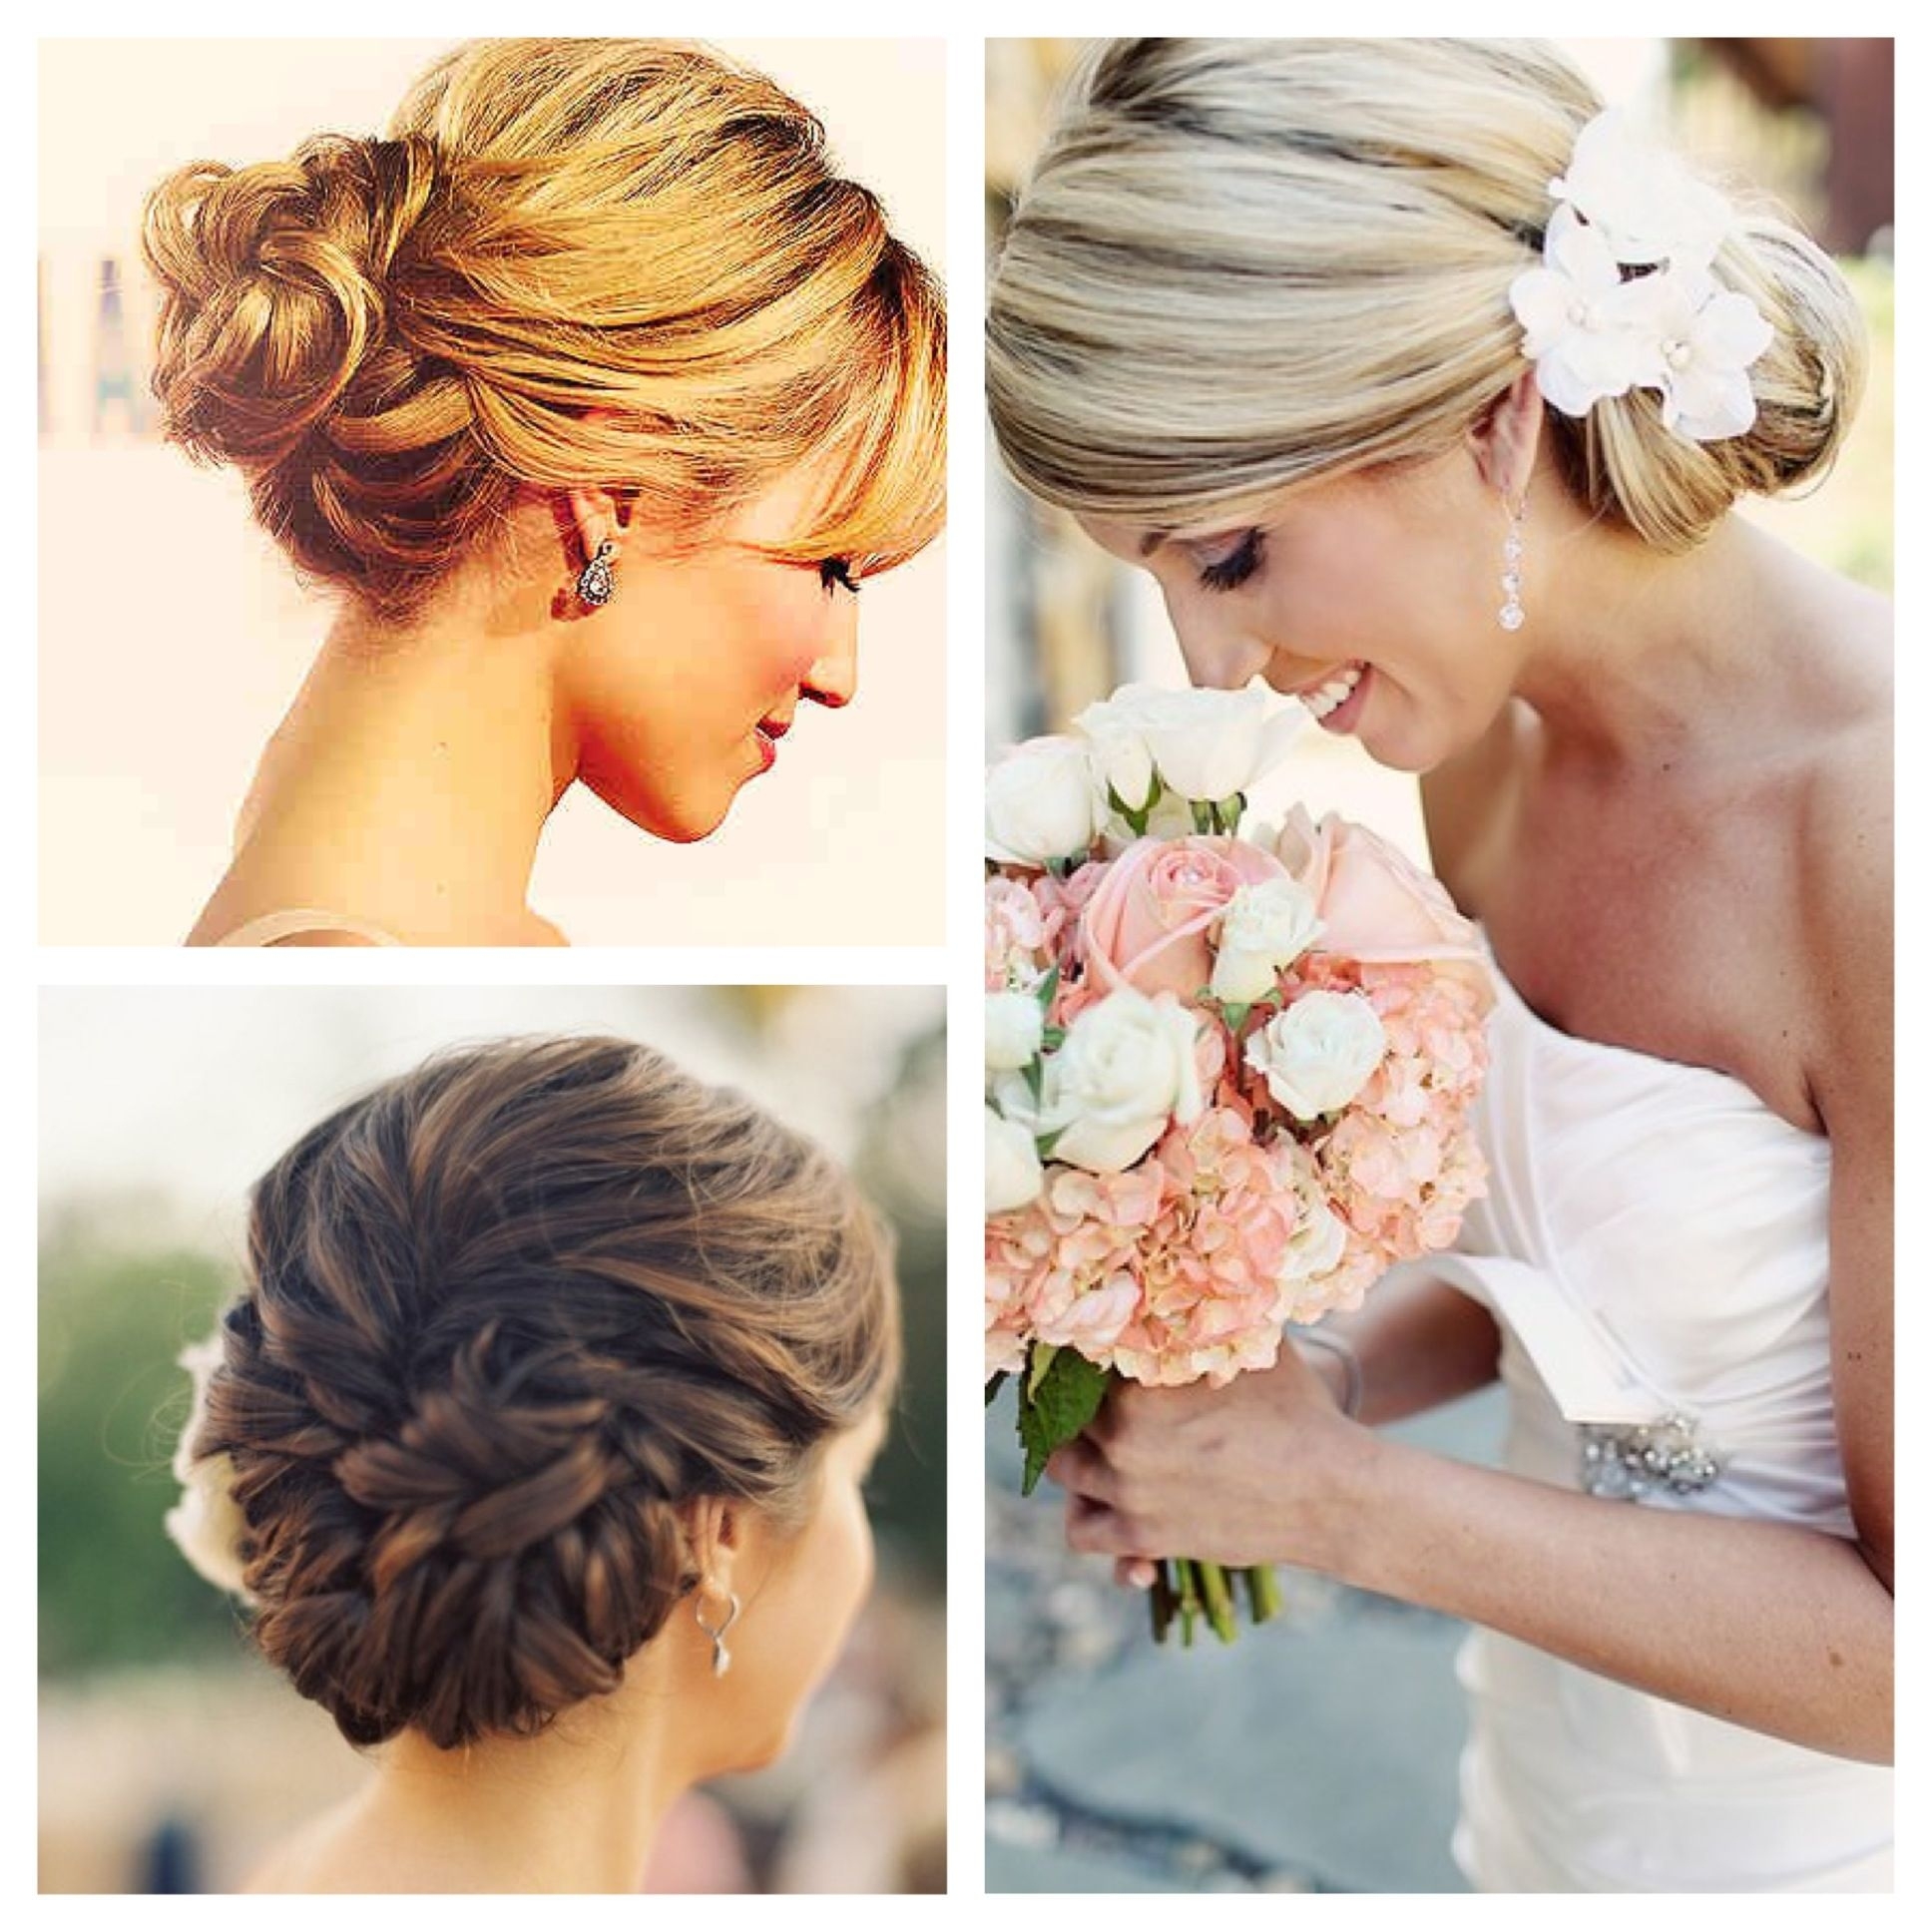 Bridesmaids And Matron Of Honor Hairstyles. | The Big Day with Matron Of Honour Hairstyles